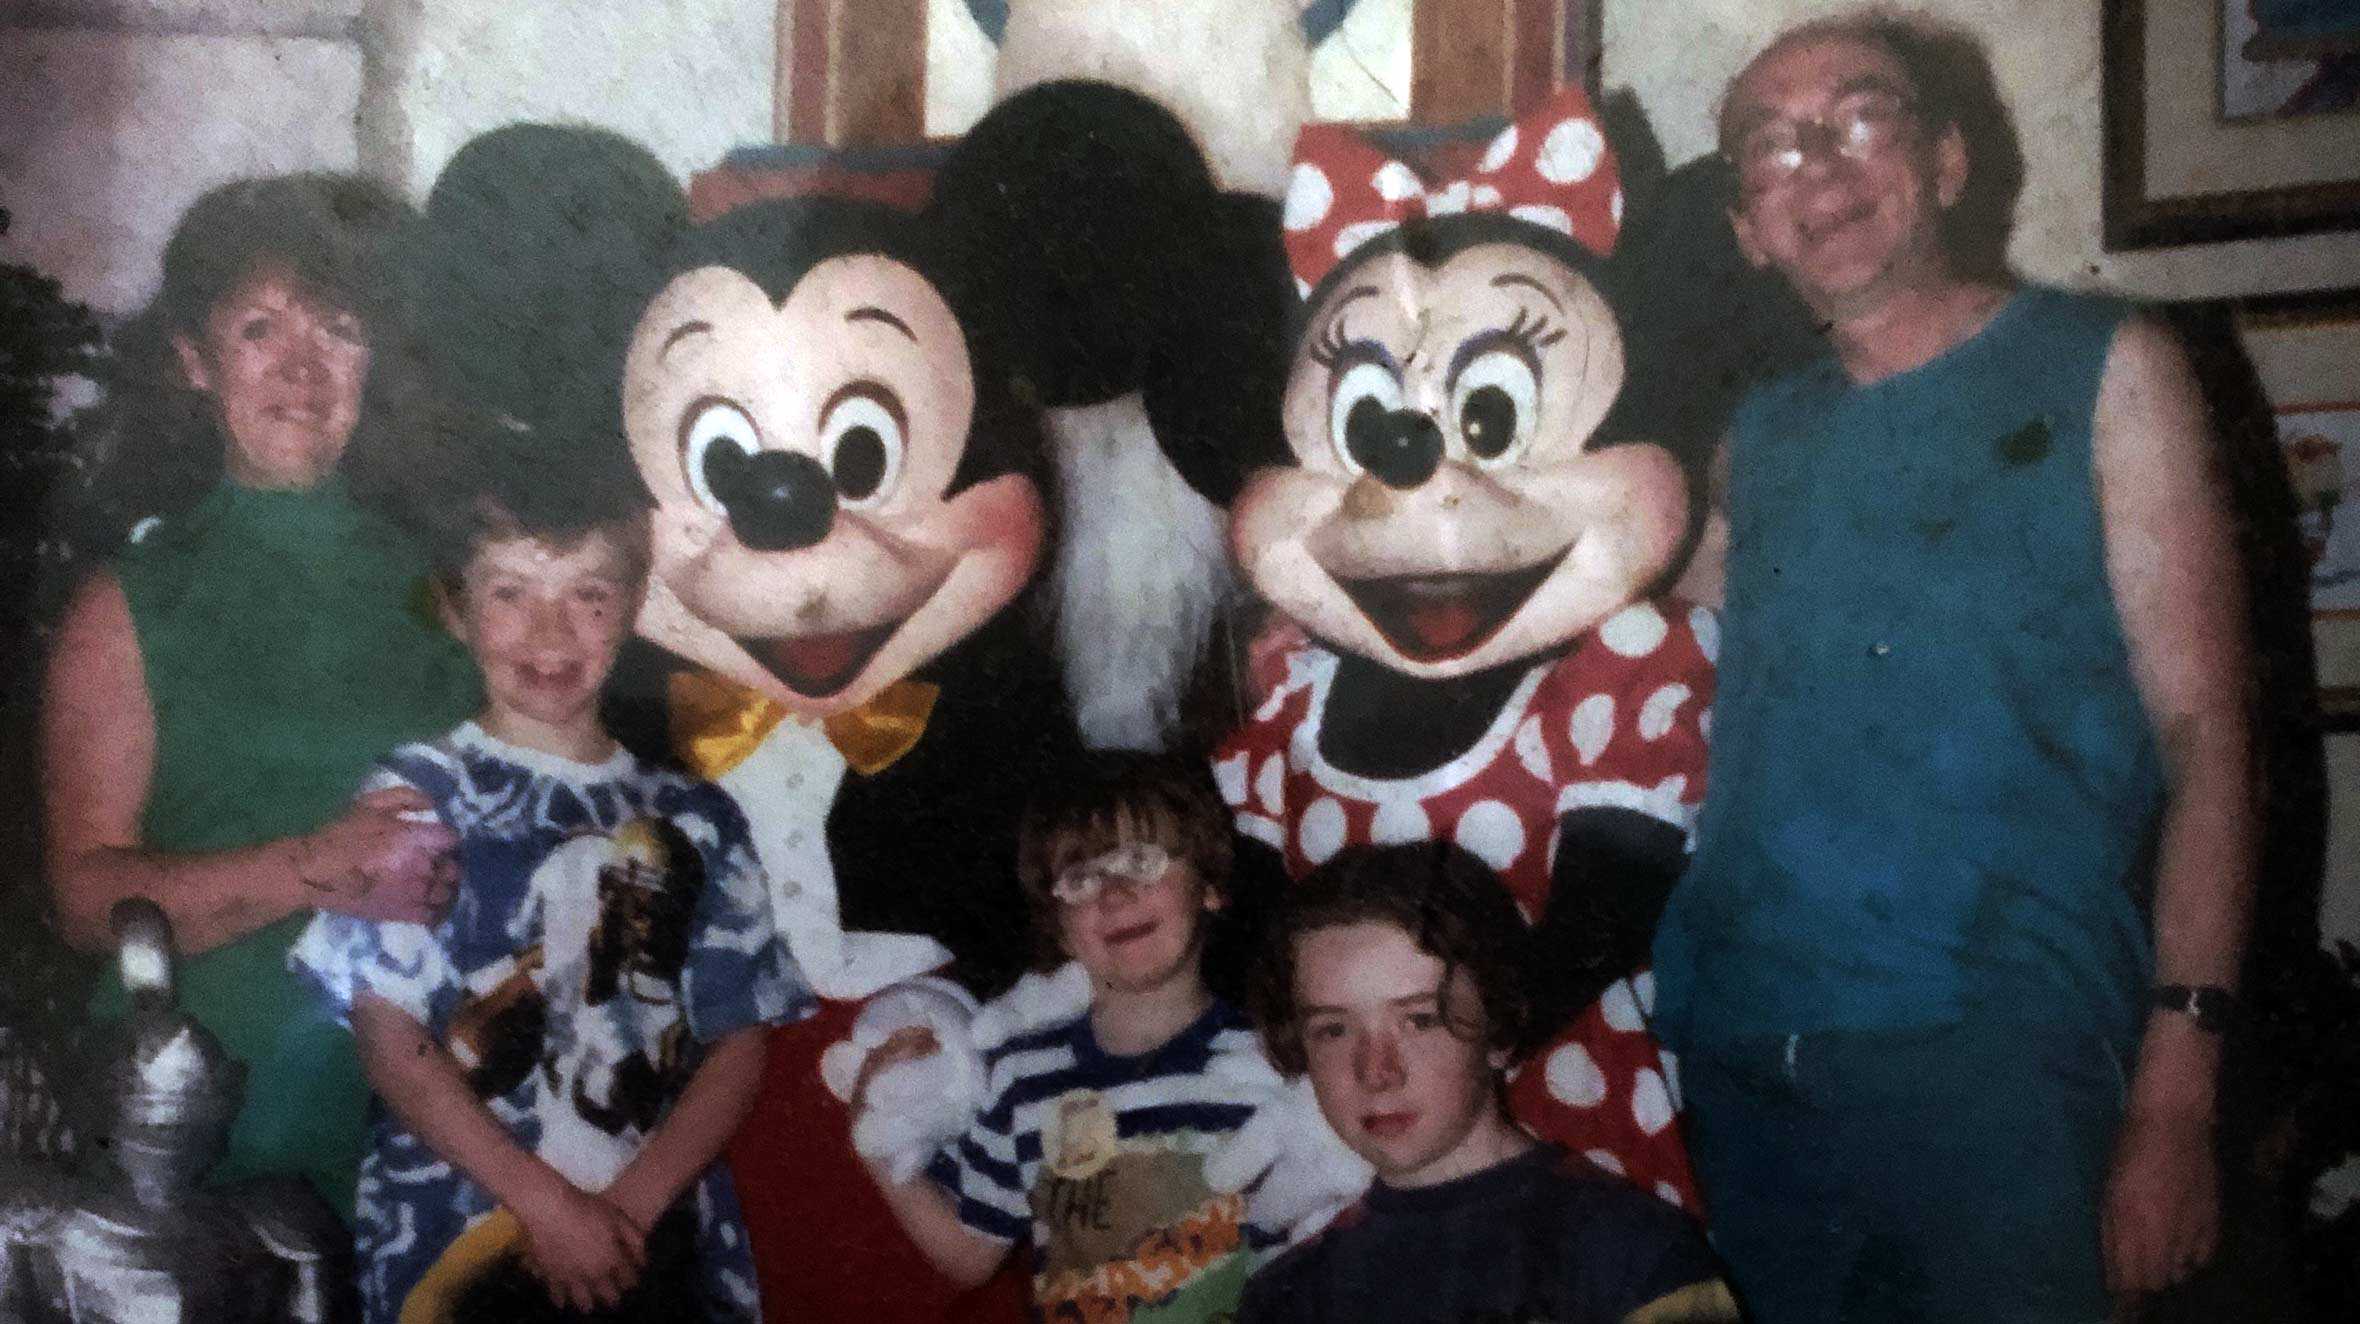 An old photo of Padraig and his family with Mickey and Minnie, during his brother's wish to visit Walt Disney World in Florida.